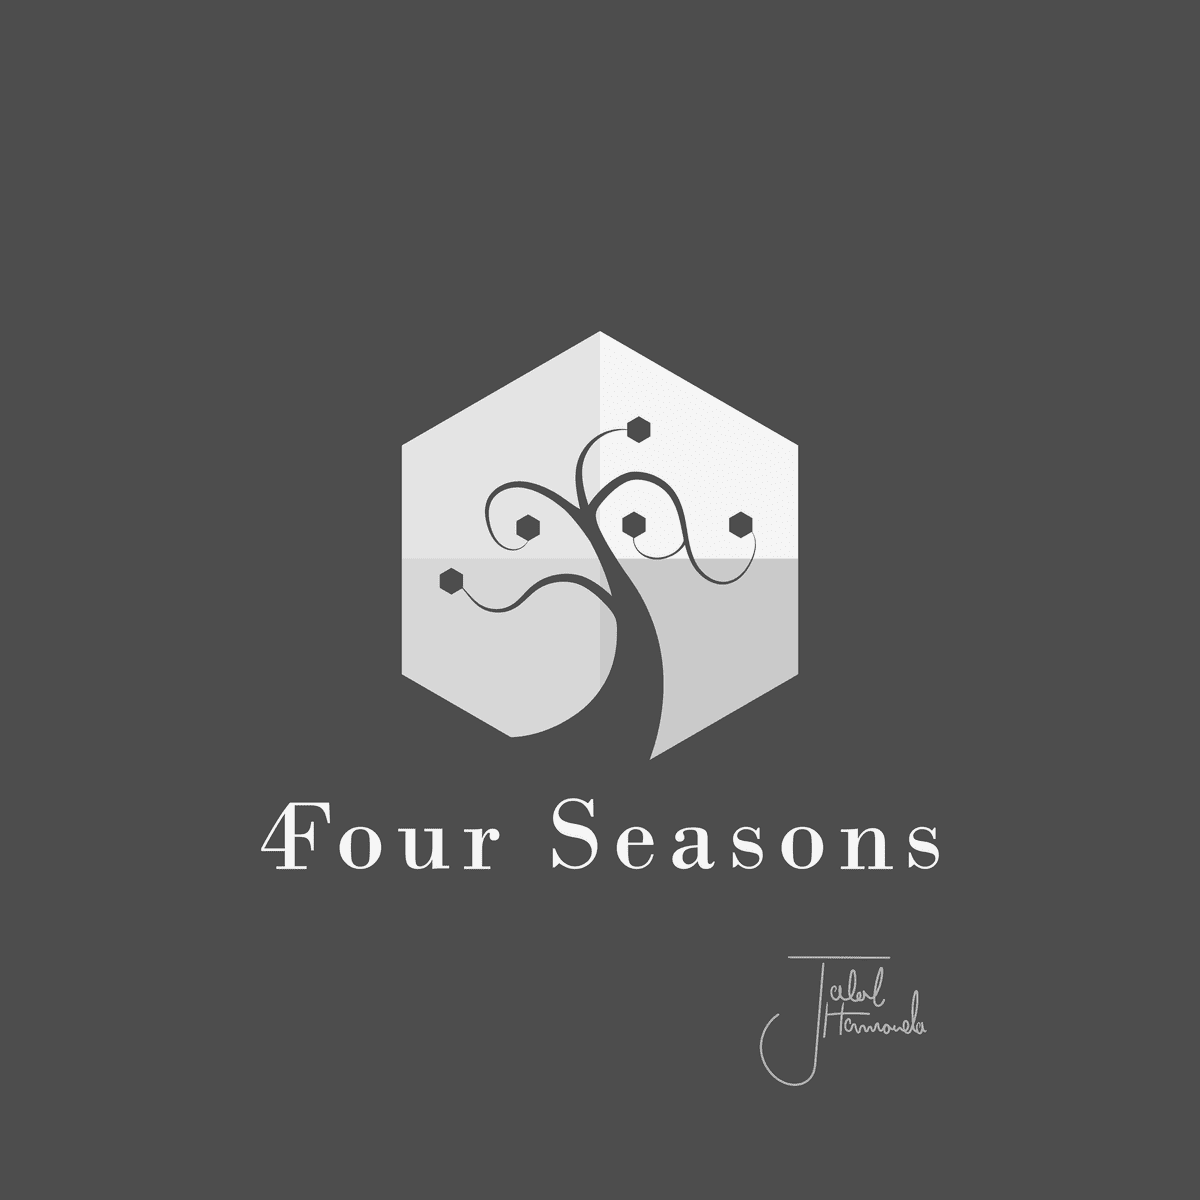 4our_Seasons_28July2019_02